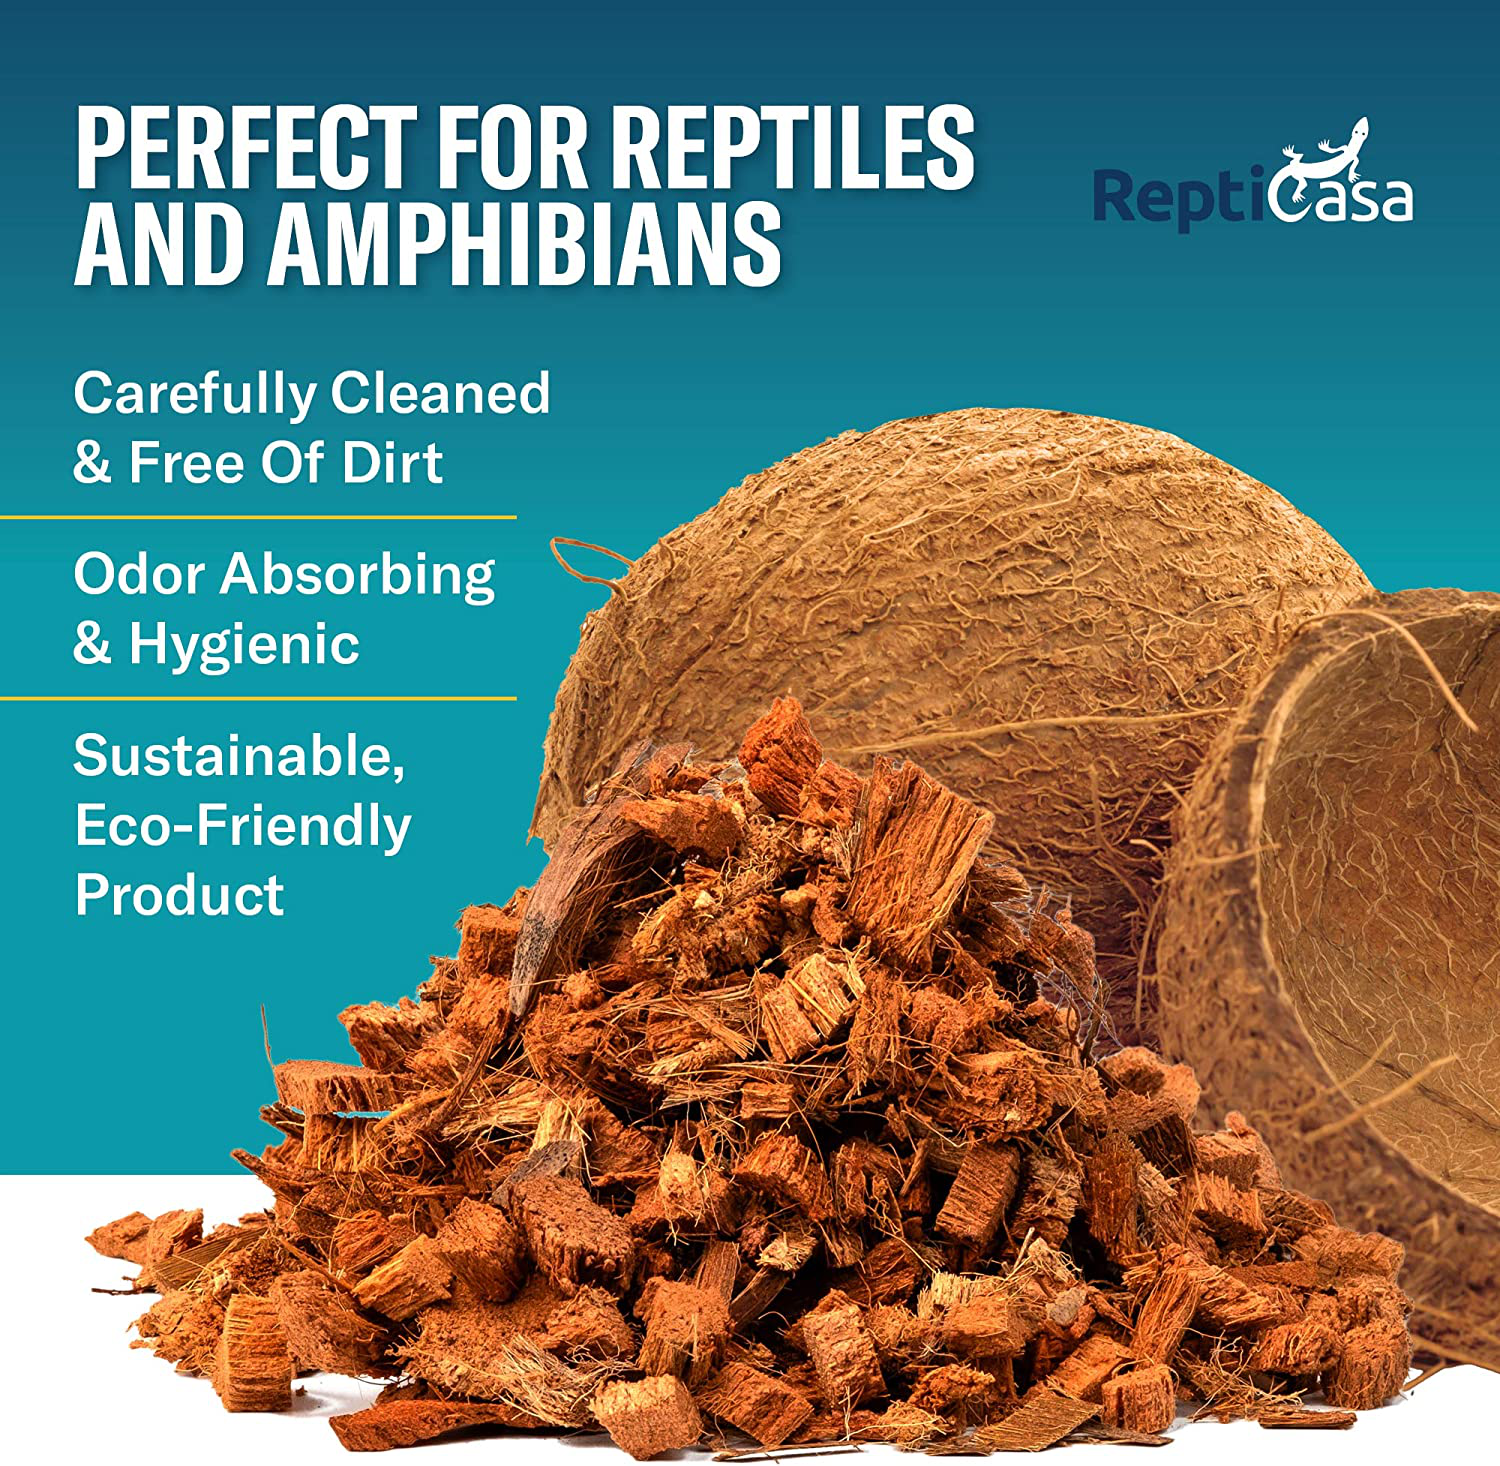 Repticasa Organic Coconut Chips Expandable Substrate Block for Reptiles, Snakes, Tortoise, and Amphibians, Natural Fiber Free Husks, Clean Breeding and Bedding Flooring, Odor Absorbing, up to 75 Quart Animals & Pet Supplies > Pet Supplies > Reptile & Amphibian Supplies > Reptile & Amphibian Substrates ReptiCasa   